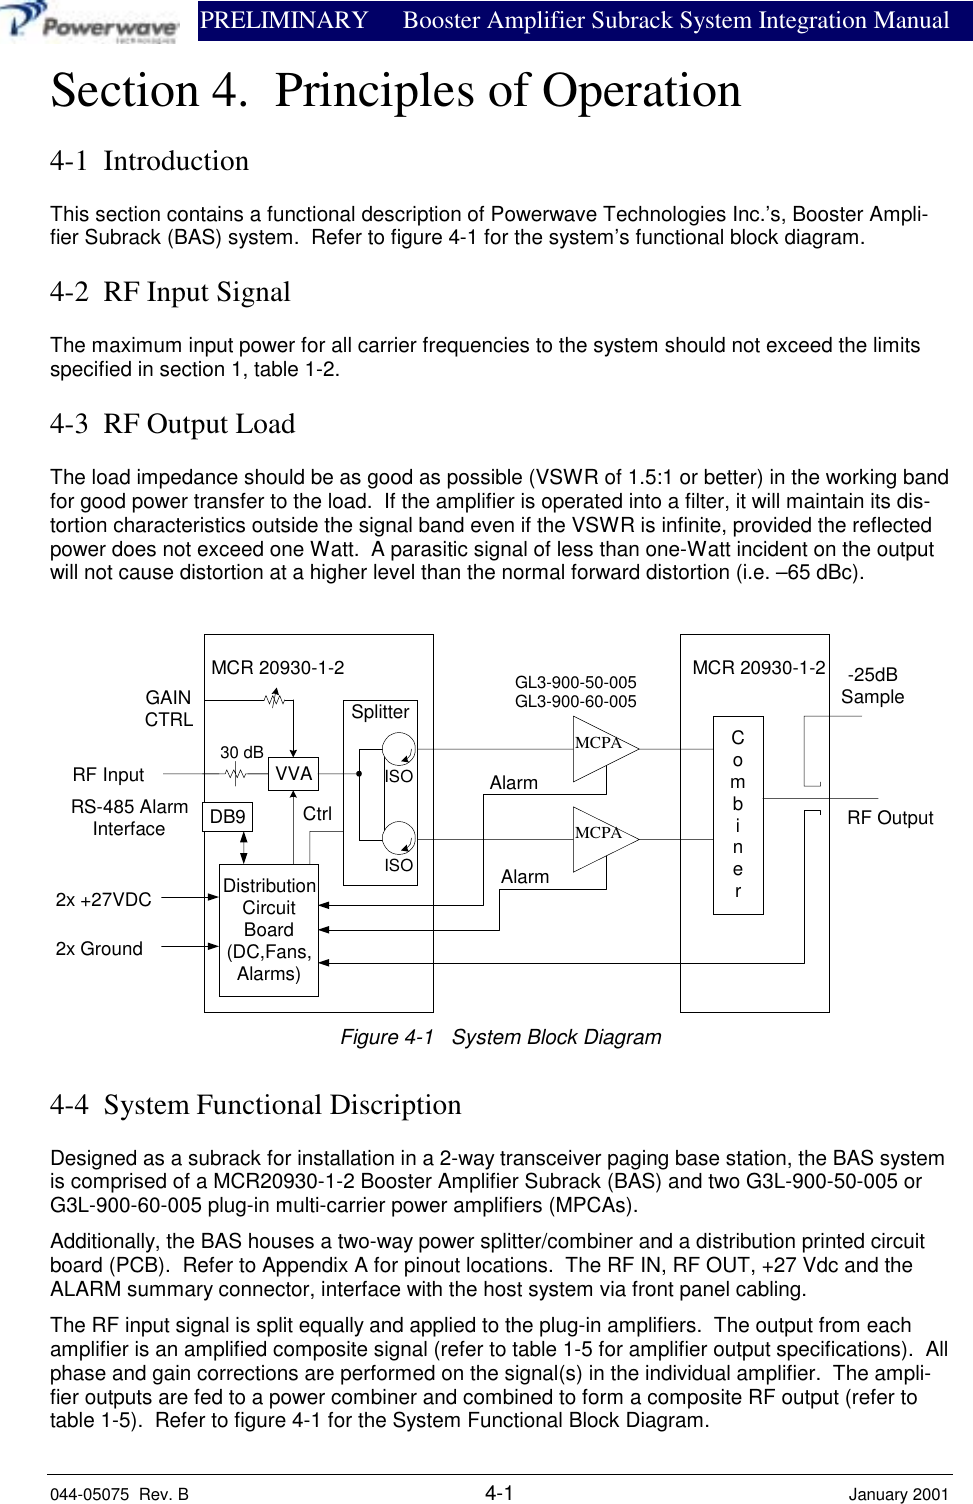                PRELIMINARY Booster Amplifier Subrack System Integration Manual044-05075  Rev. B 4-1 January 2001Section 4.  Principles of Operation4-1  IntroductionThis section contains a functional description of Powerwave Technologies Inc.’s, Booster Ampli-fier Subrack (BAS) system.  Refer to figure 4-1 for the system’s functional block diagram.4-2  RF Input SignalThe maximum input power for all carrier frequencies to the system should not exceed the limitsspecified in section 1, table 1-2.4-3  RF Output LoadThe load impedance should be as good as possible (VSWR of 1.5:1 or better) in the working bandfor good power transfer to the load.  If the amplifier is operated into a filter, it will maintain its dis-tortion characteristics outside the signal band even if the VSWR is infinite, provided the reflectedpower does not exceed one Watt.  A parasitic signal of less than one-Watt incident on the outputwill not cause distortion at a higher level than the normal forward distortion (i.e. –65 dBc). MCR 20930-1-2  MCR 20930-1-2MCPAMCPARS-485 AlarmInterfaceVVACombinerGAINCTRL SplitterDistributionCircuitBoard(DC,Fans,Alarms)ISOISO-25dBSampleDB9AlarmAlarmCtrl2x +27VDC2x GroundRF InputRF OutputGL3-900-50-005GL3-900-60-00530 dBFigure 4-1   System Block Diagram4-4  System Functional DiscriptionDesigned as a subrack for installation in a 2-way transceiver paging base station, the BAS systemis comprised of a MCR20930-1-2 Booster Amplifier Subrack (BAS) and two G3L-900-50-005 orG3L-900-60-005 plug-in multi-carrier power amplifiers (MPCAs).Additionally, the BAS houses a two-way power splitter/combiner and a distribution printed circuitboard (PCB).  Refer to Appendix A for pinout locations.  The RF IN, RF OUT, +27 Vdc and theALARM summary connector, interface with the host system via front panel cabling.The RF input signal is split equally and applied to the plug-in amplifiers.  The output from eachamplifier is an amplified composite signal (refer to table 1-5 for amplifier output specifications).  Allphase and gain corrections are performed on the signal(s) in the individual amplifier.  The ampli-fier outputs are fed to a power combiner and combined to form a composite RF output (refer totable 1-5).  Refer to figure 4-1 for the System Functional Block Diagram.